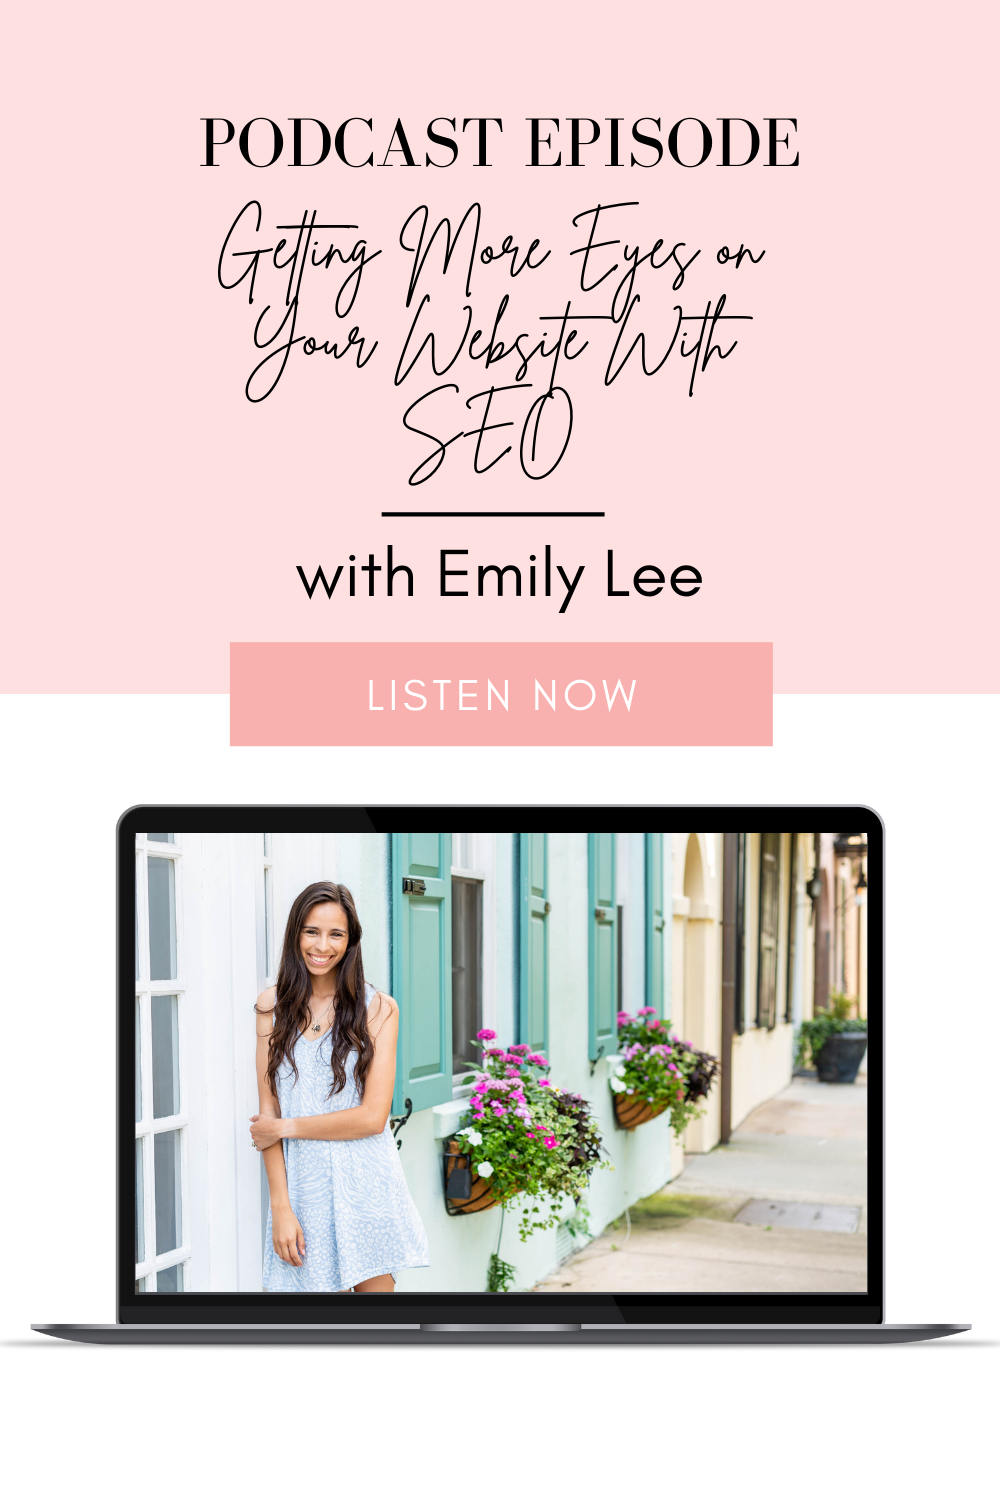 How to use SEO to get more eyes on your website with Emily Lee